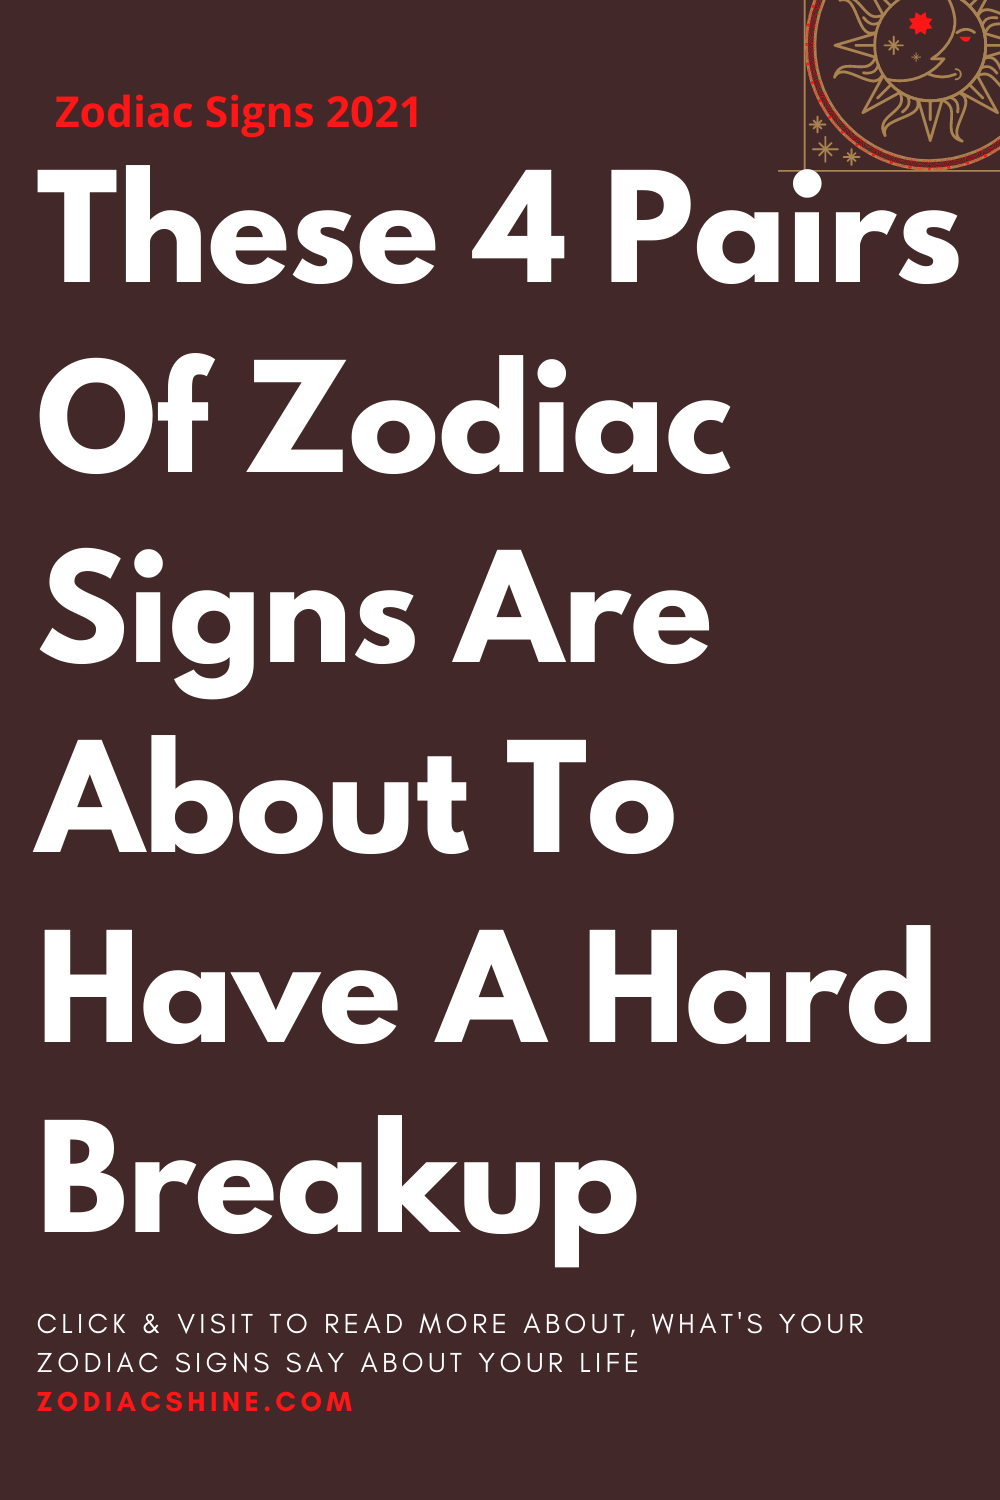 These 4 Pairs Of Zodiac Signs Are About To Have A Hard Breakup